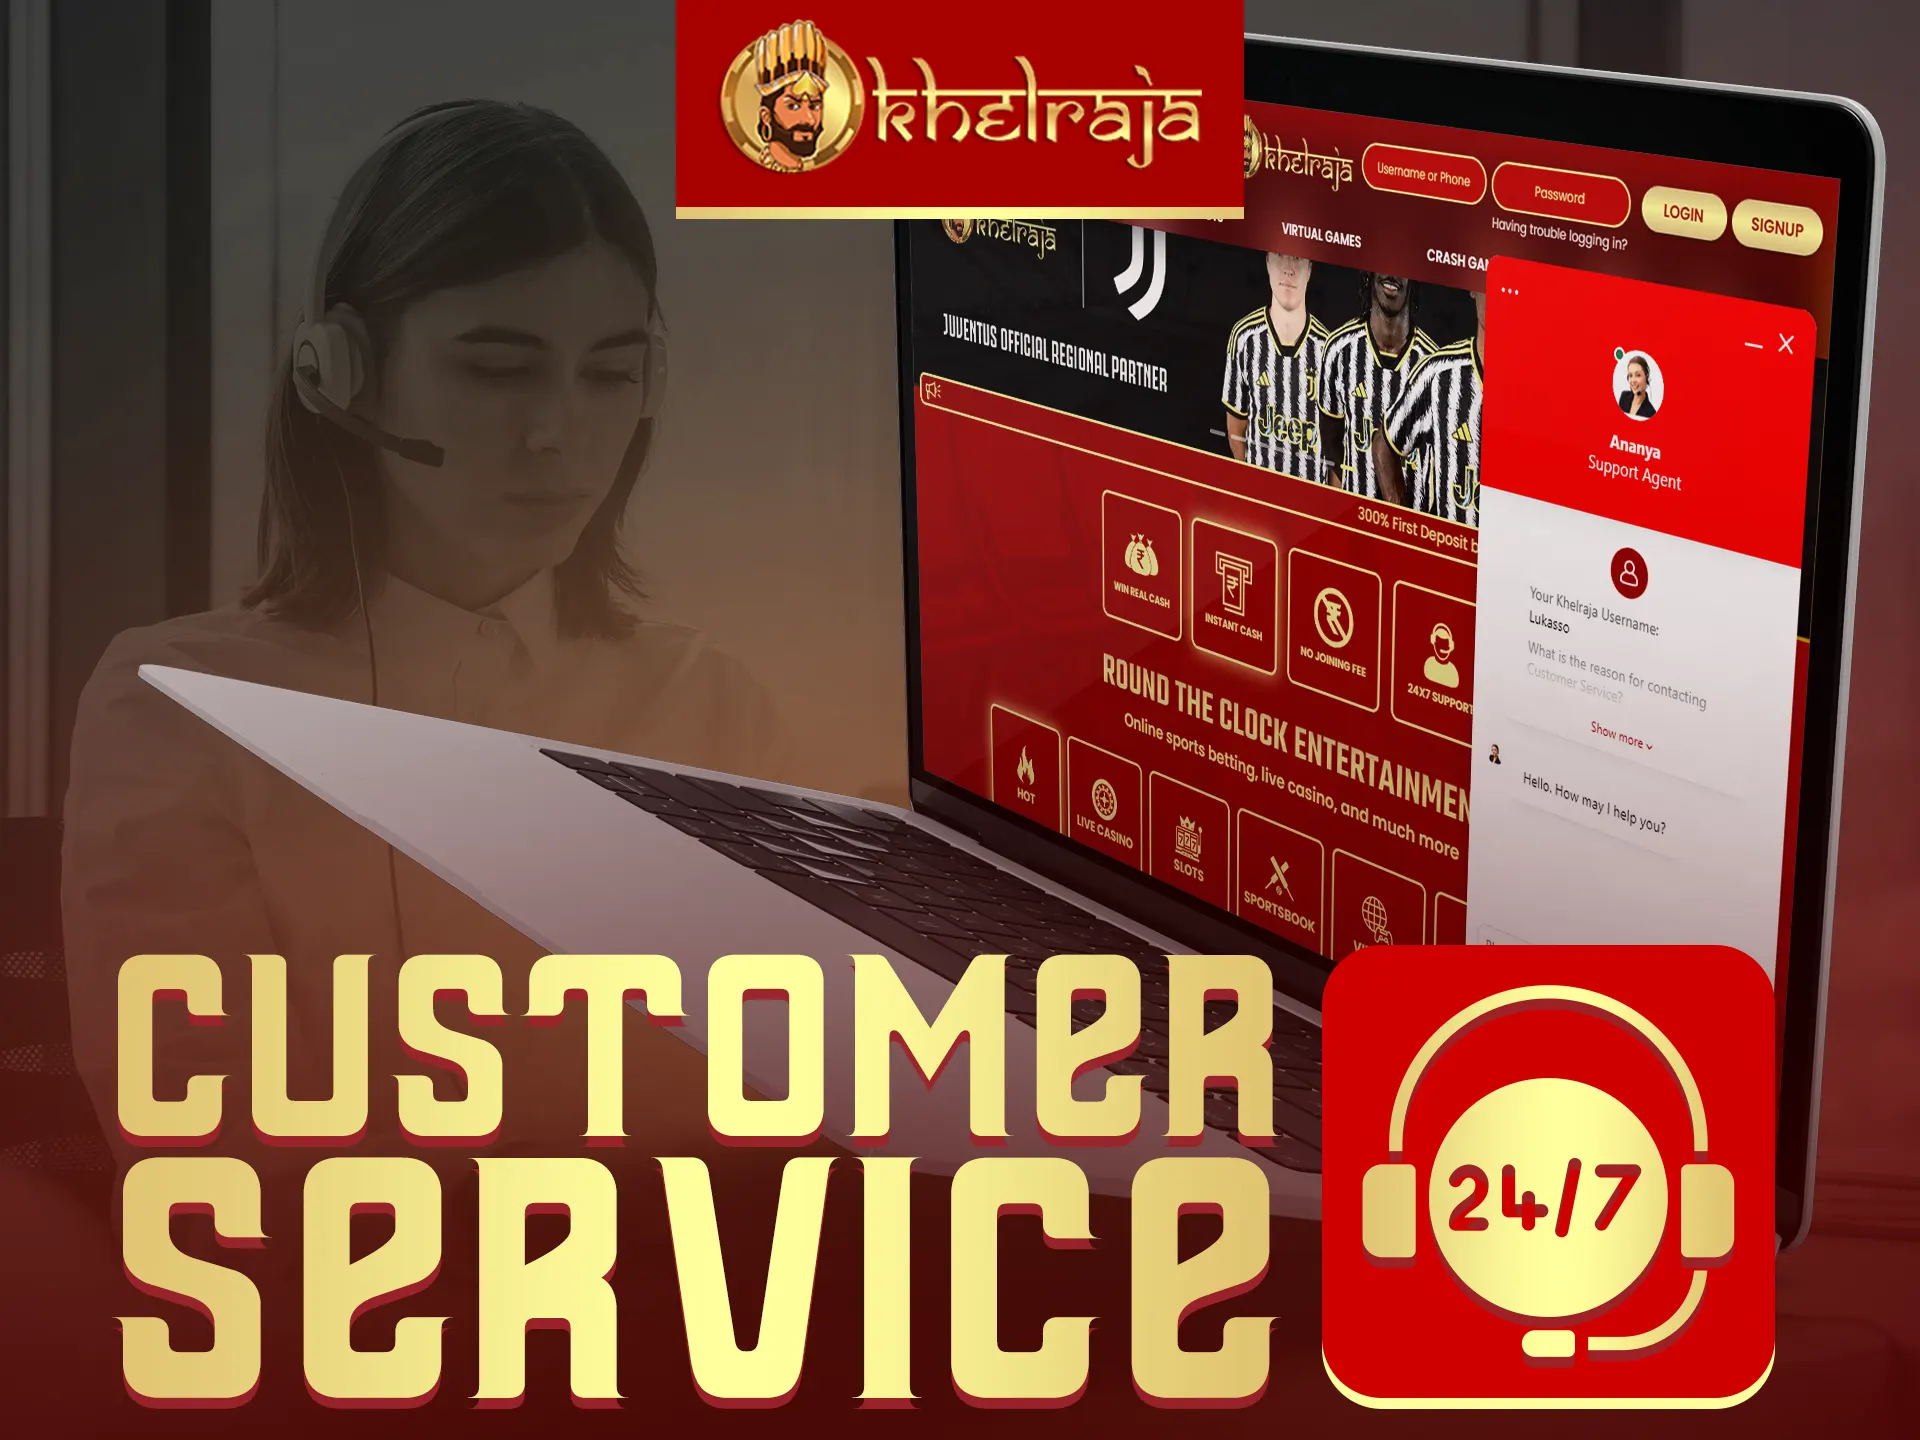 Khelraja offers round-the-clock customer support assistance.